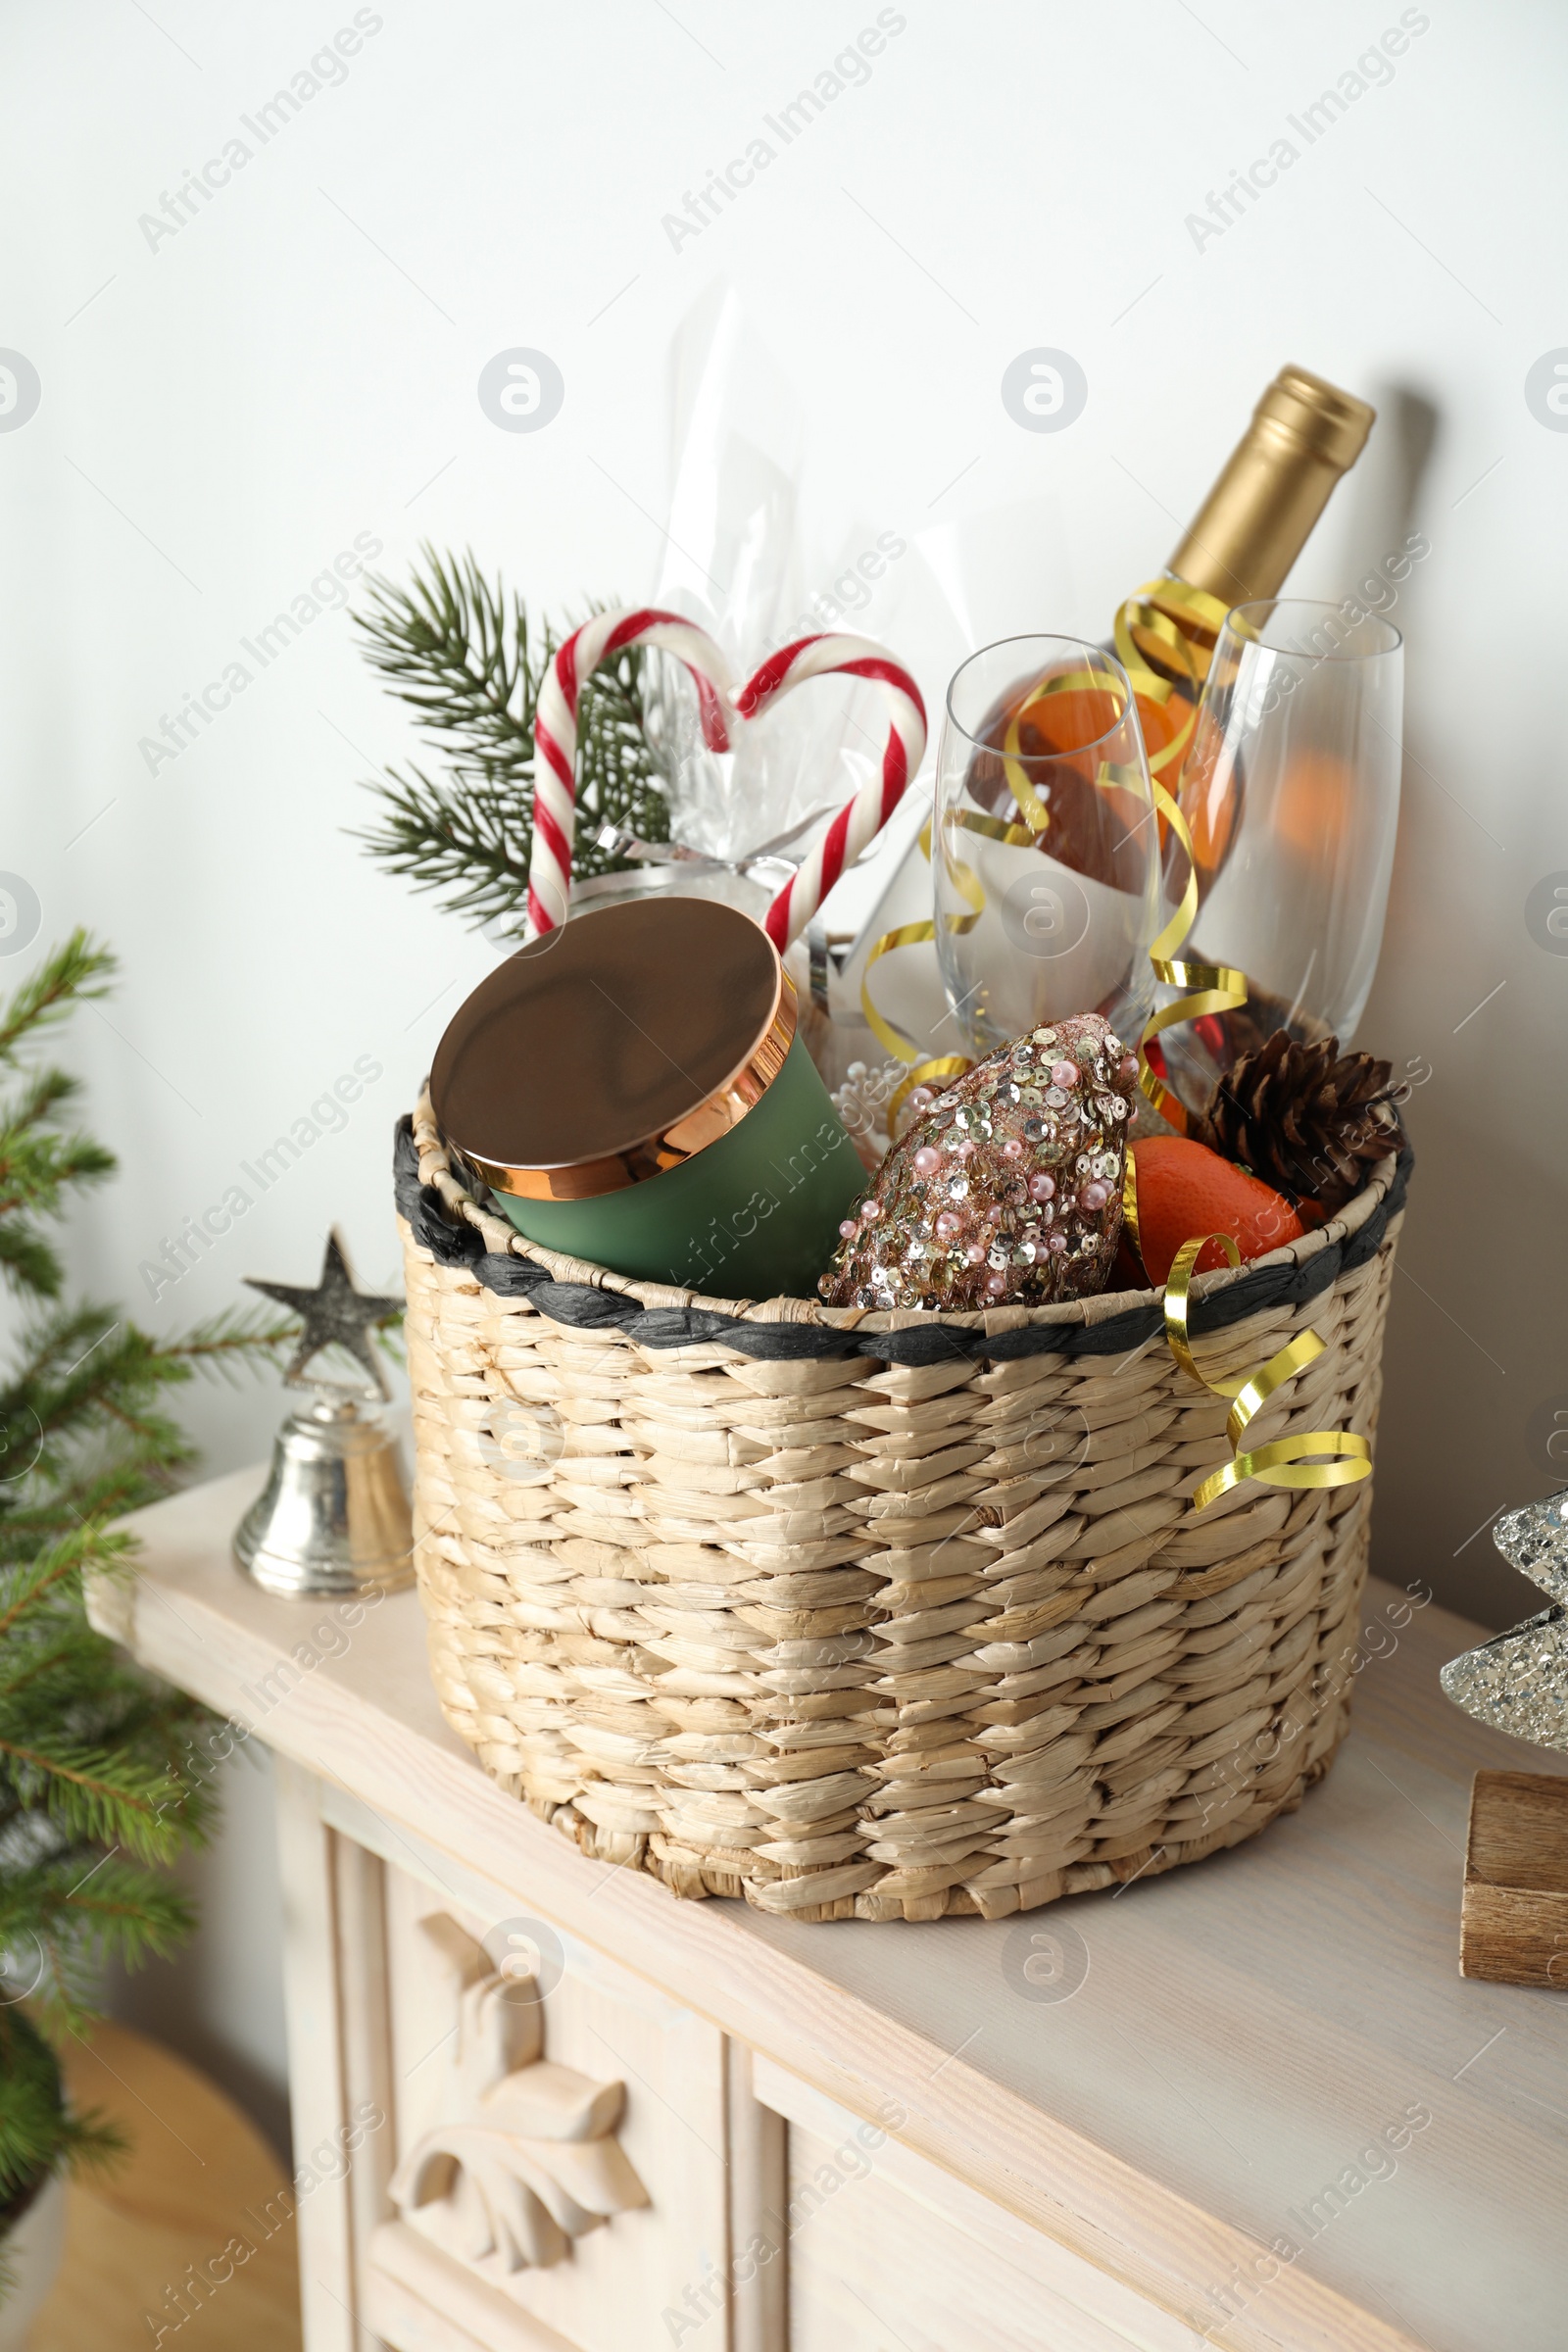 Photo of Wicker basket with gift set and Christmas decor on shelf